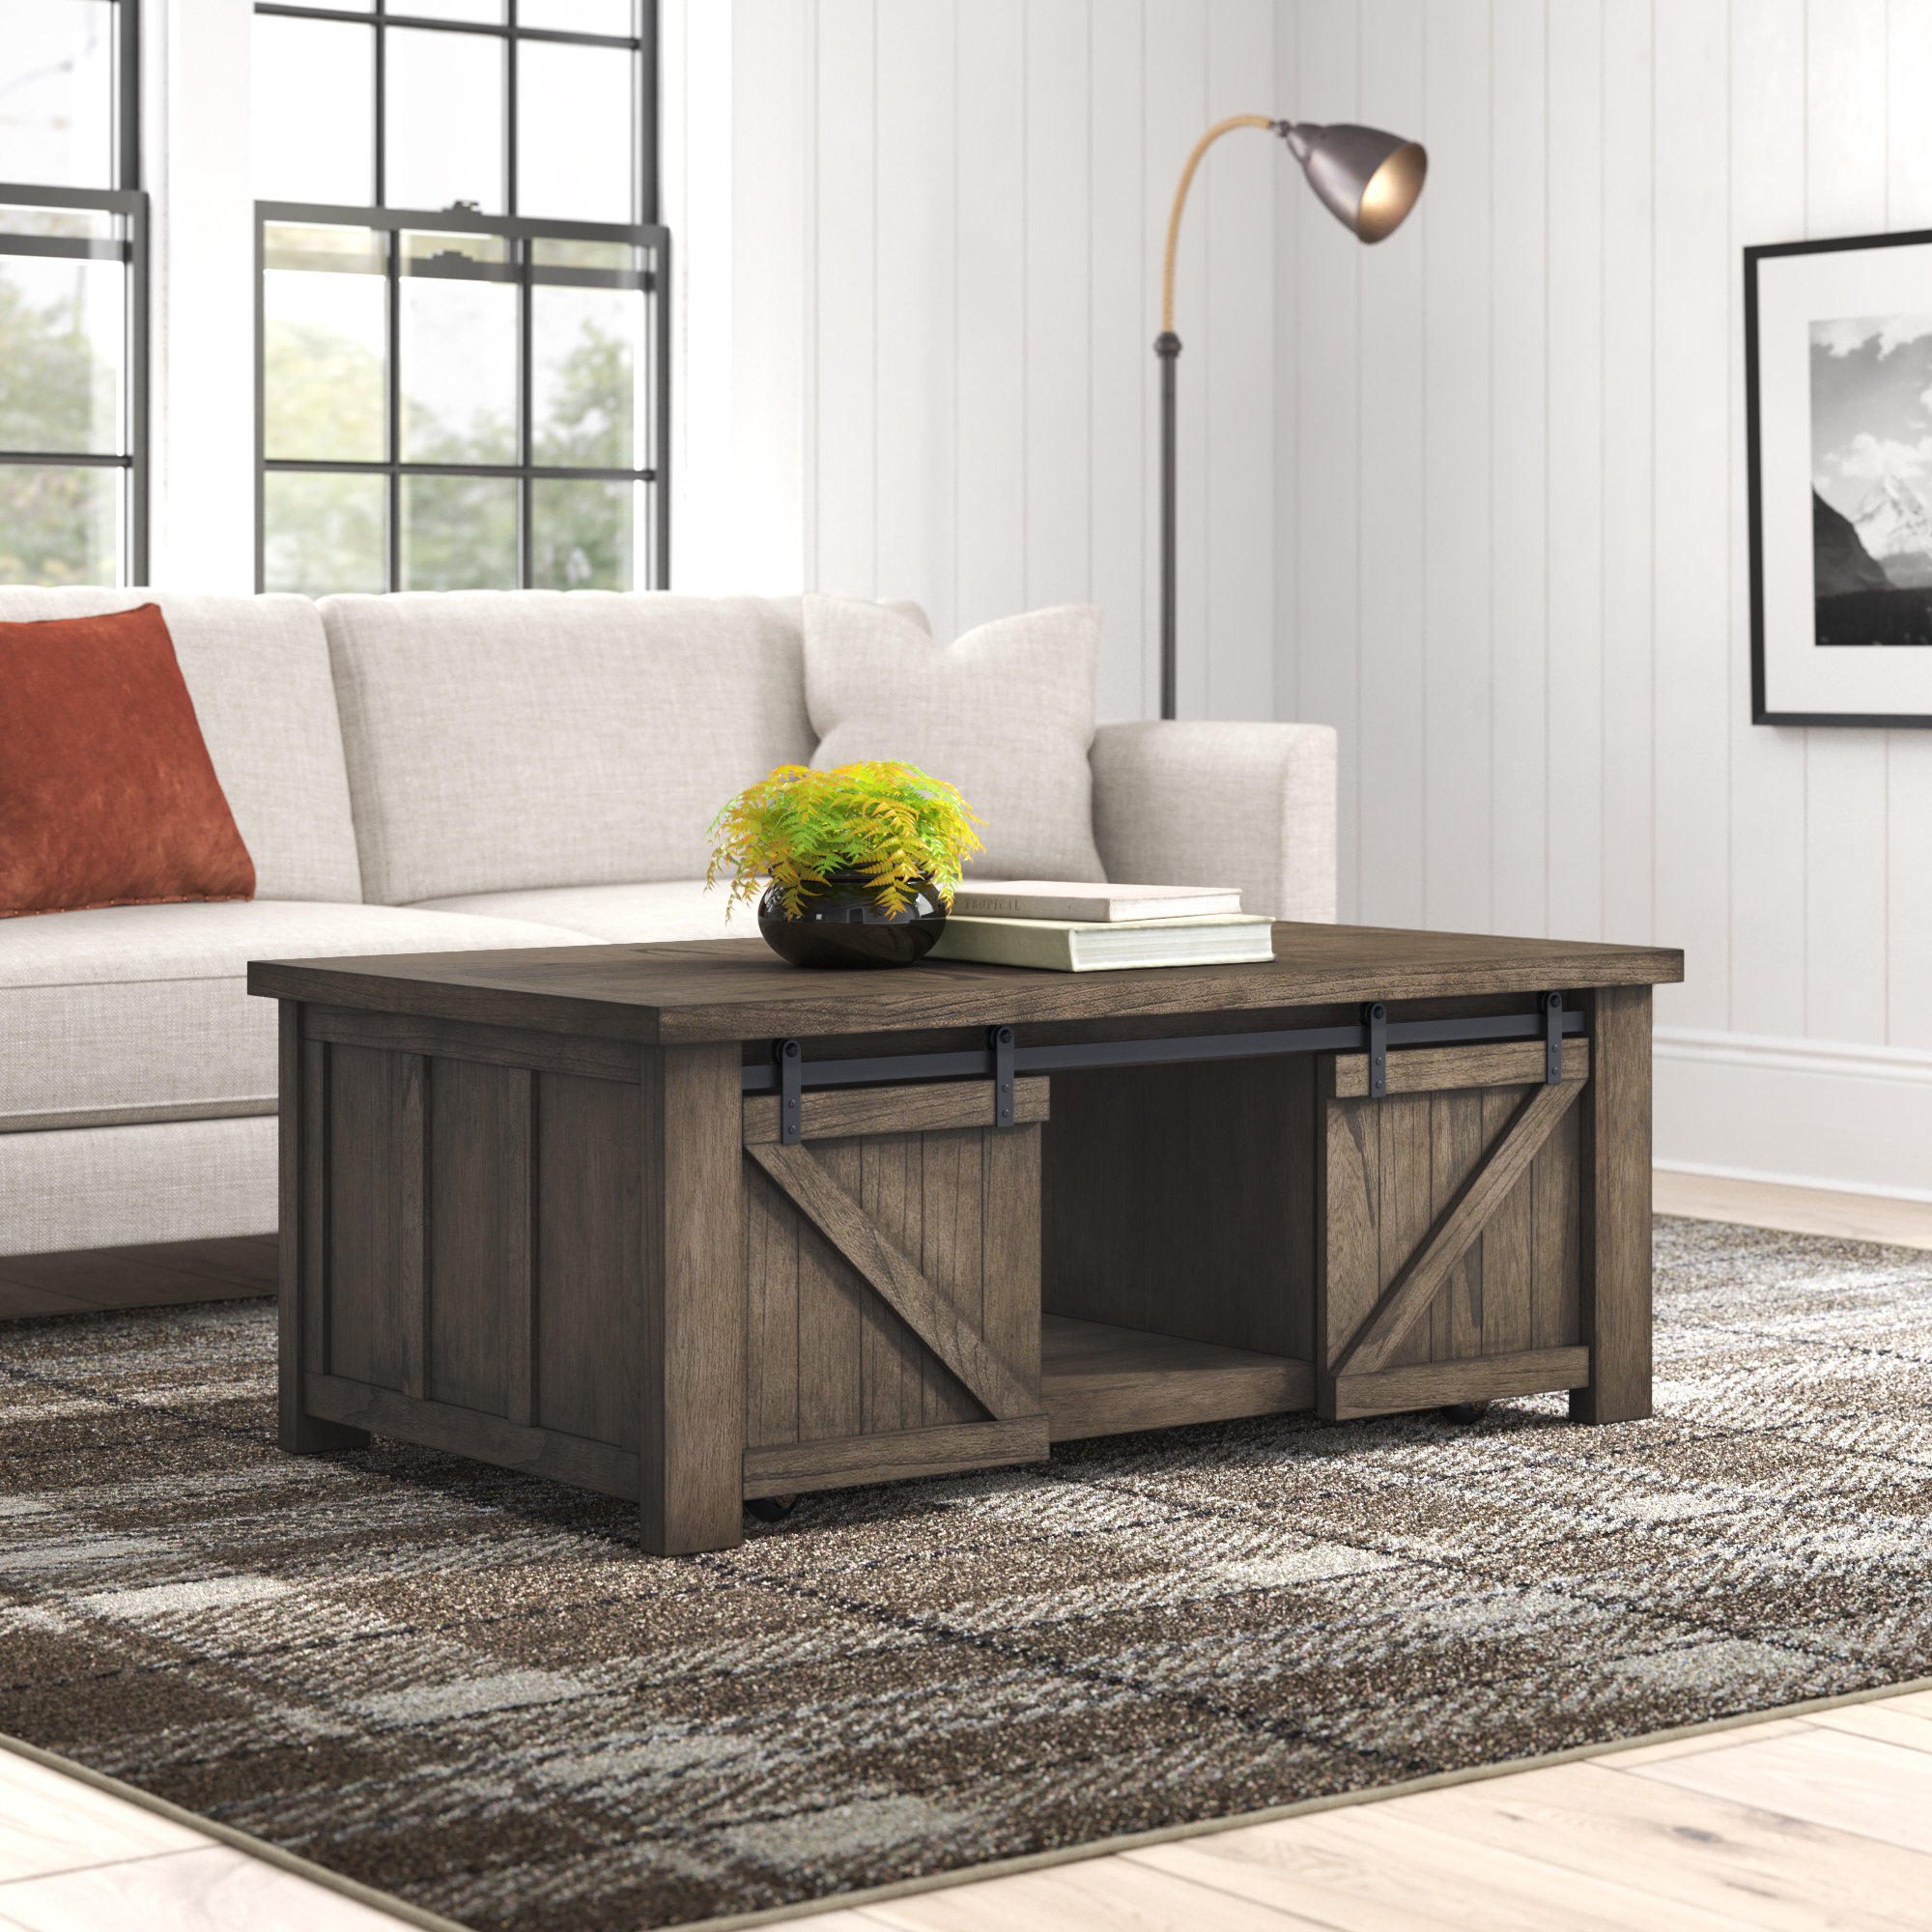 Sydne Style shows how to style a coffee table for fall decor ideas